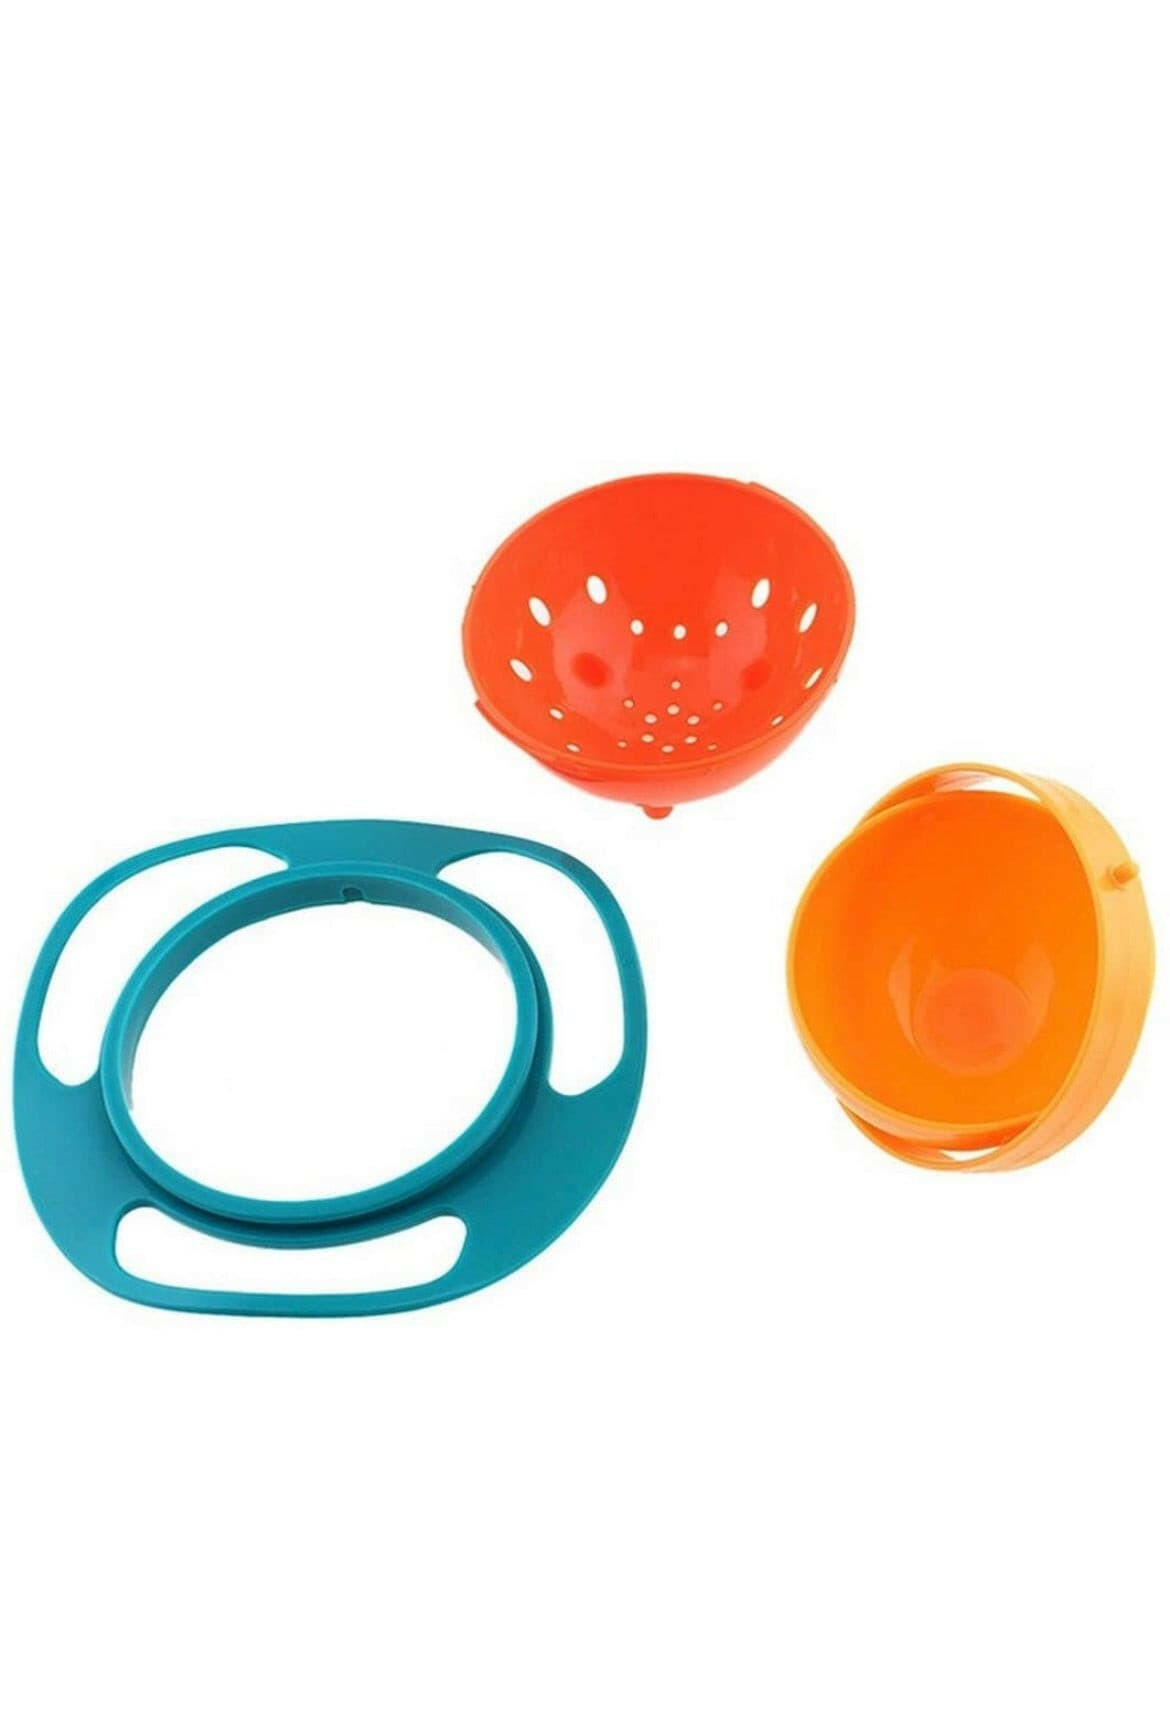 360 -baby Spill Resistant Gyro Bowl with Lid.